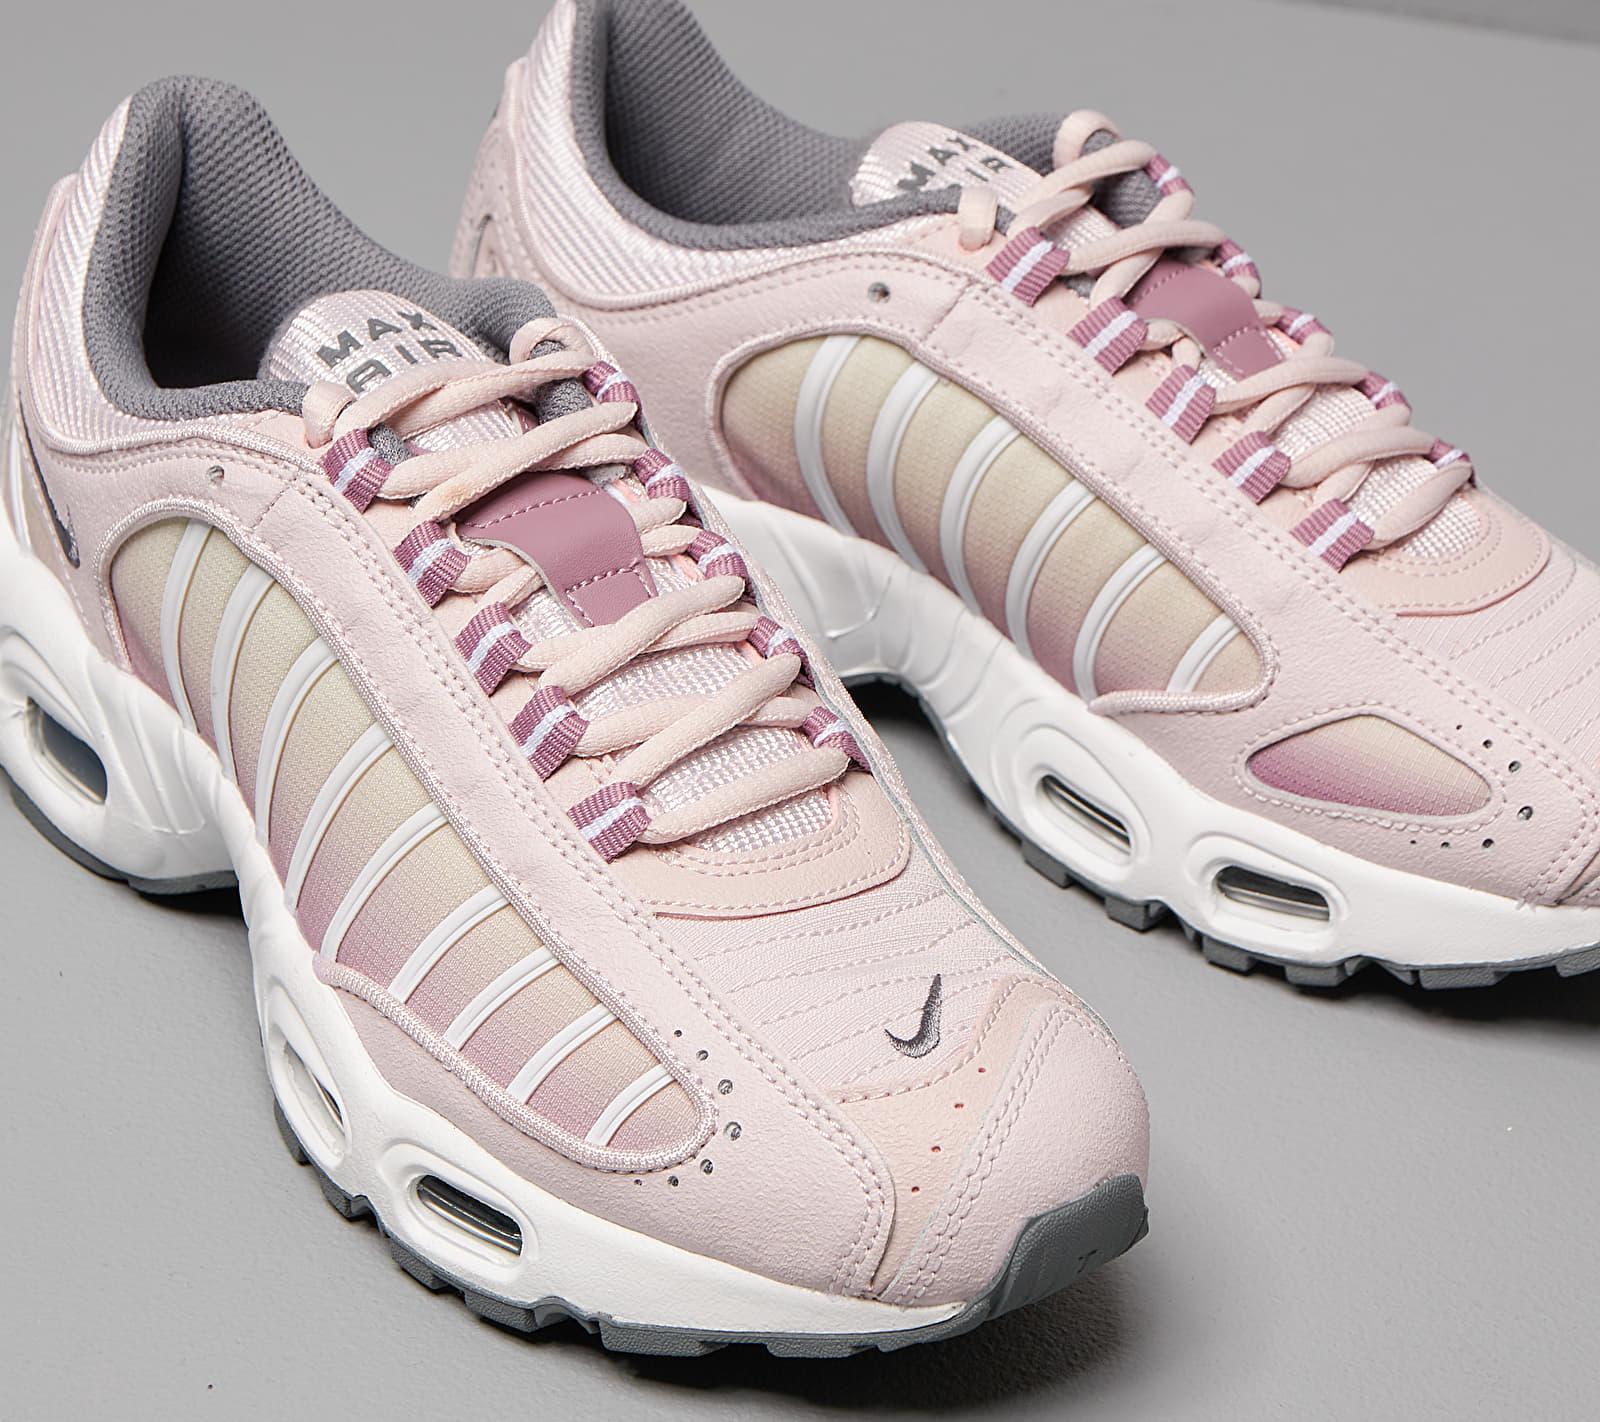 Nike Lace Air Max Tailwind Iv Shoe in Pink | Lyst بريق قهوه